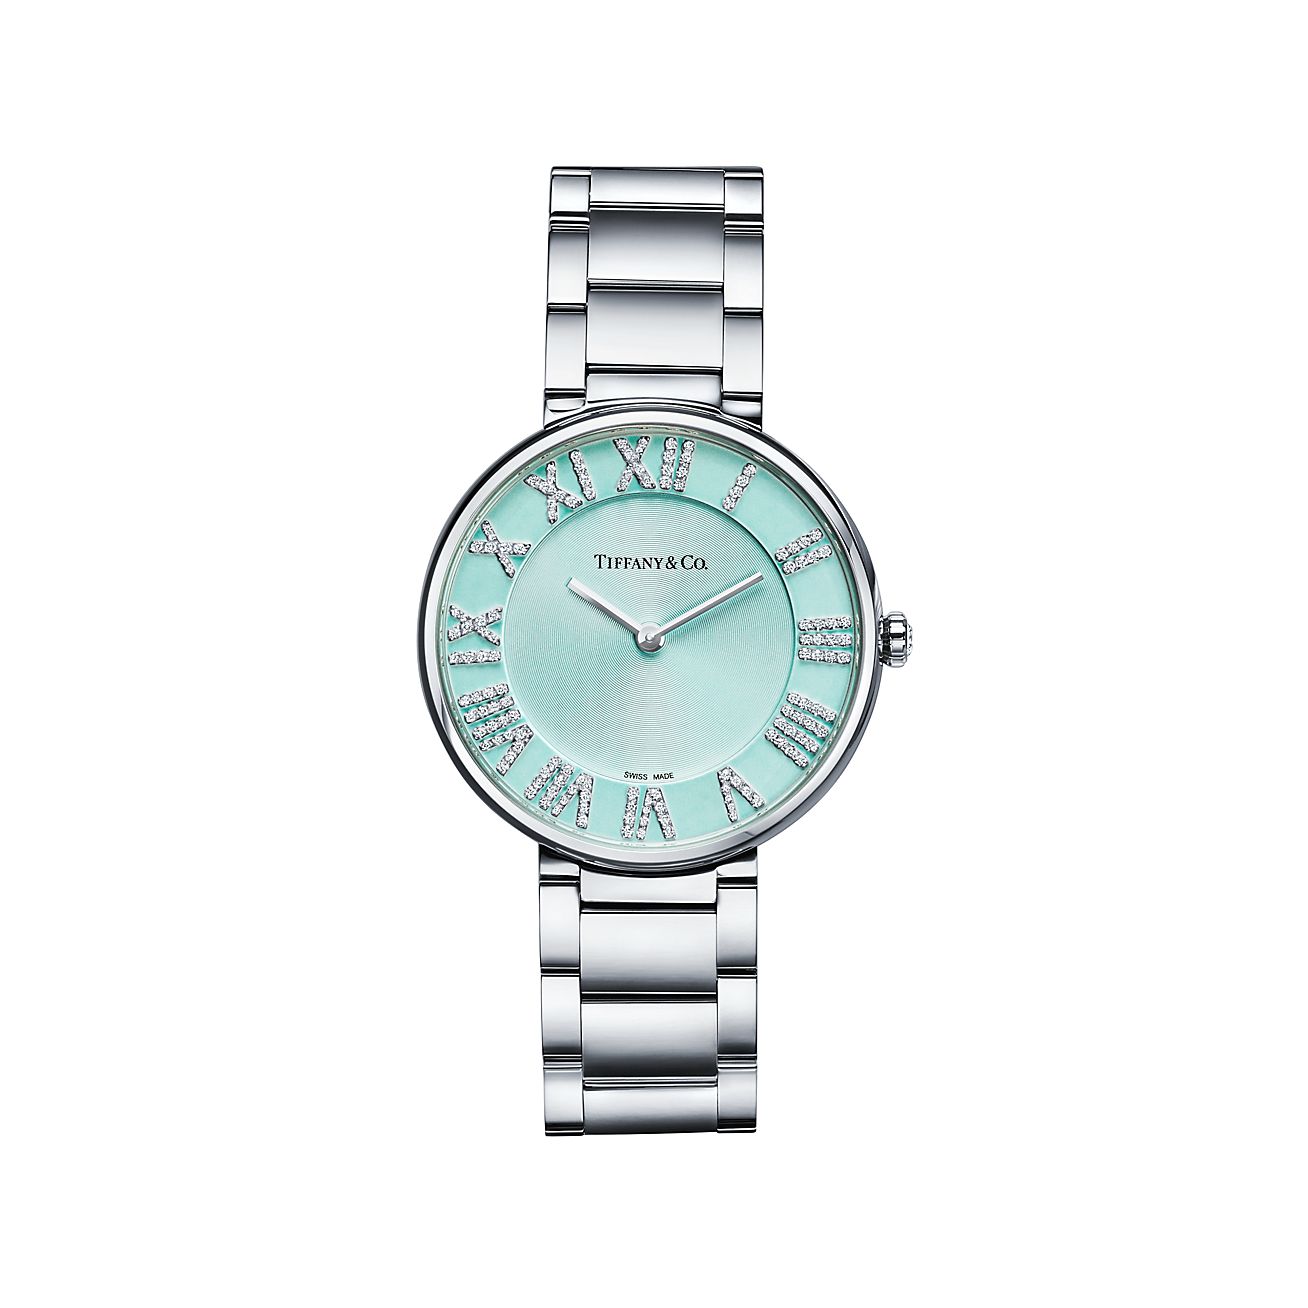 Atlas® 34 mm Watch in Stainless Steel with Diamonds and a Tiffany Blue® Dial| Tiffany & Co.